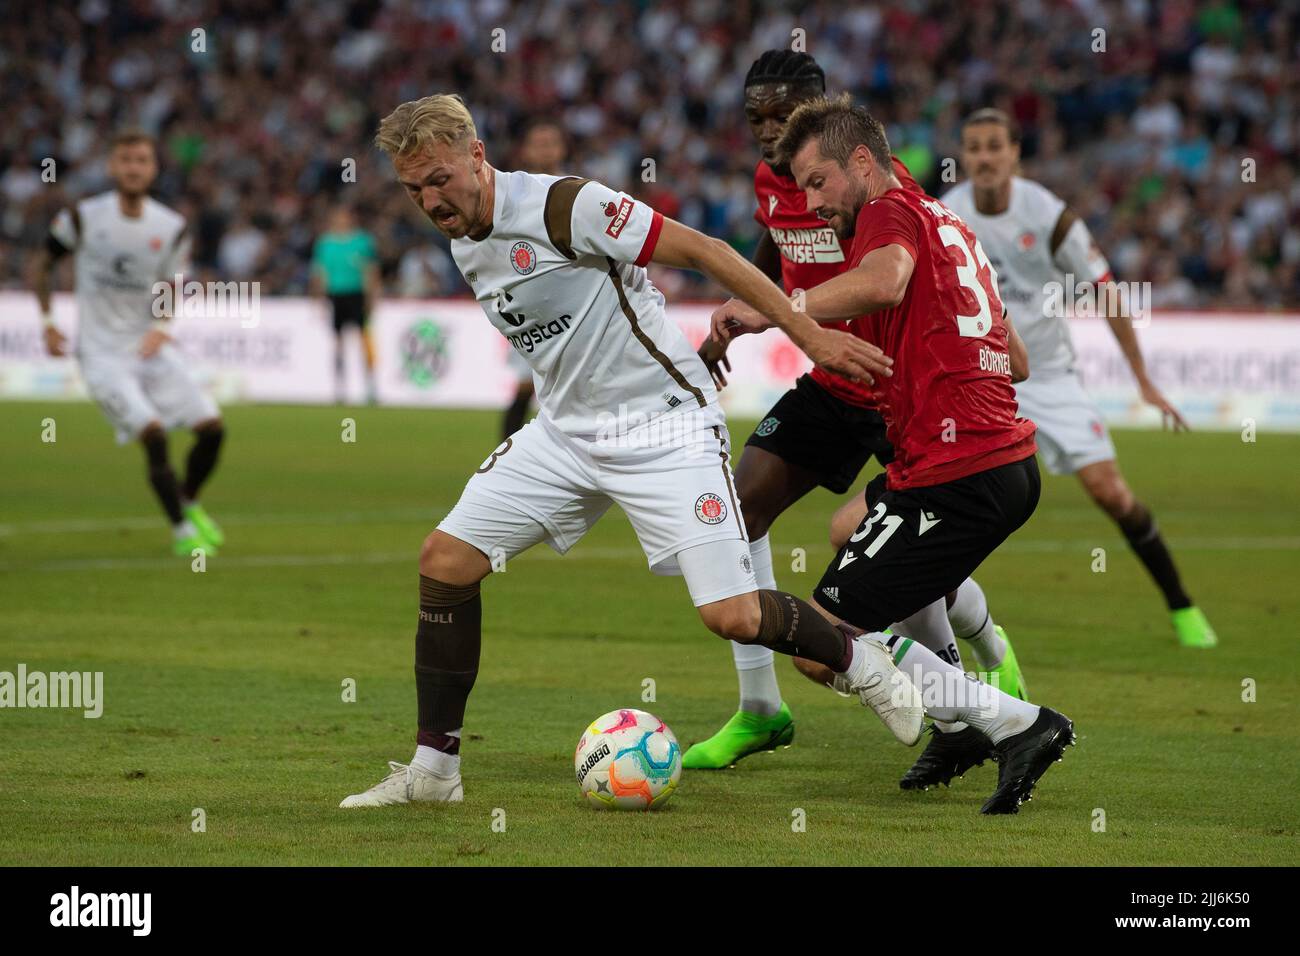 Hanover, Germany. 23rd July, 2022. Soccer: 2nd Bundesliga, Hannover 96 - FC St. Pauli, Matchday 2, Heinz von Heiden Arena. St. Pauli's Eric Smith (l) plays against Hannover's Julian Börner. Credit: Swen Pförtner/dpa - IMPORTANT NOTE: In accordance with the requirements of the DFL Deutsche Fußball Liga and the DFB Deutscher Fußball-Bund, it is prohibited to use or have used photographs taken in the stadium and/or of the match in the form of sequence pictures and/or video-like photo series./dpa/Alamy Live News Stock Photo